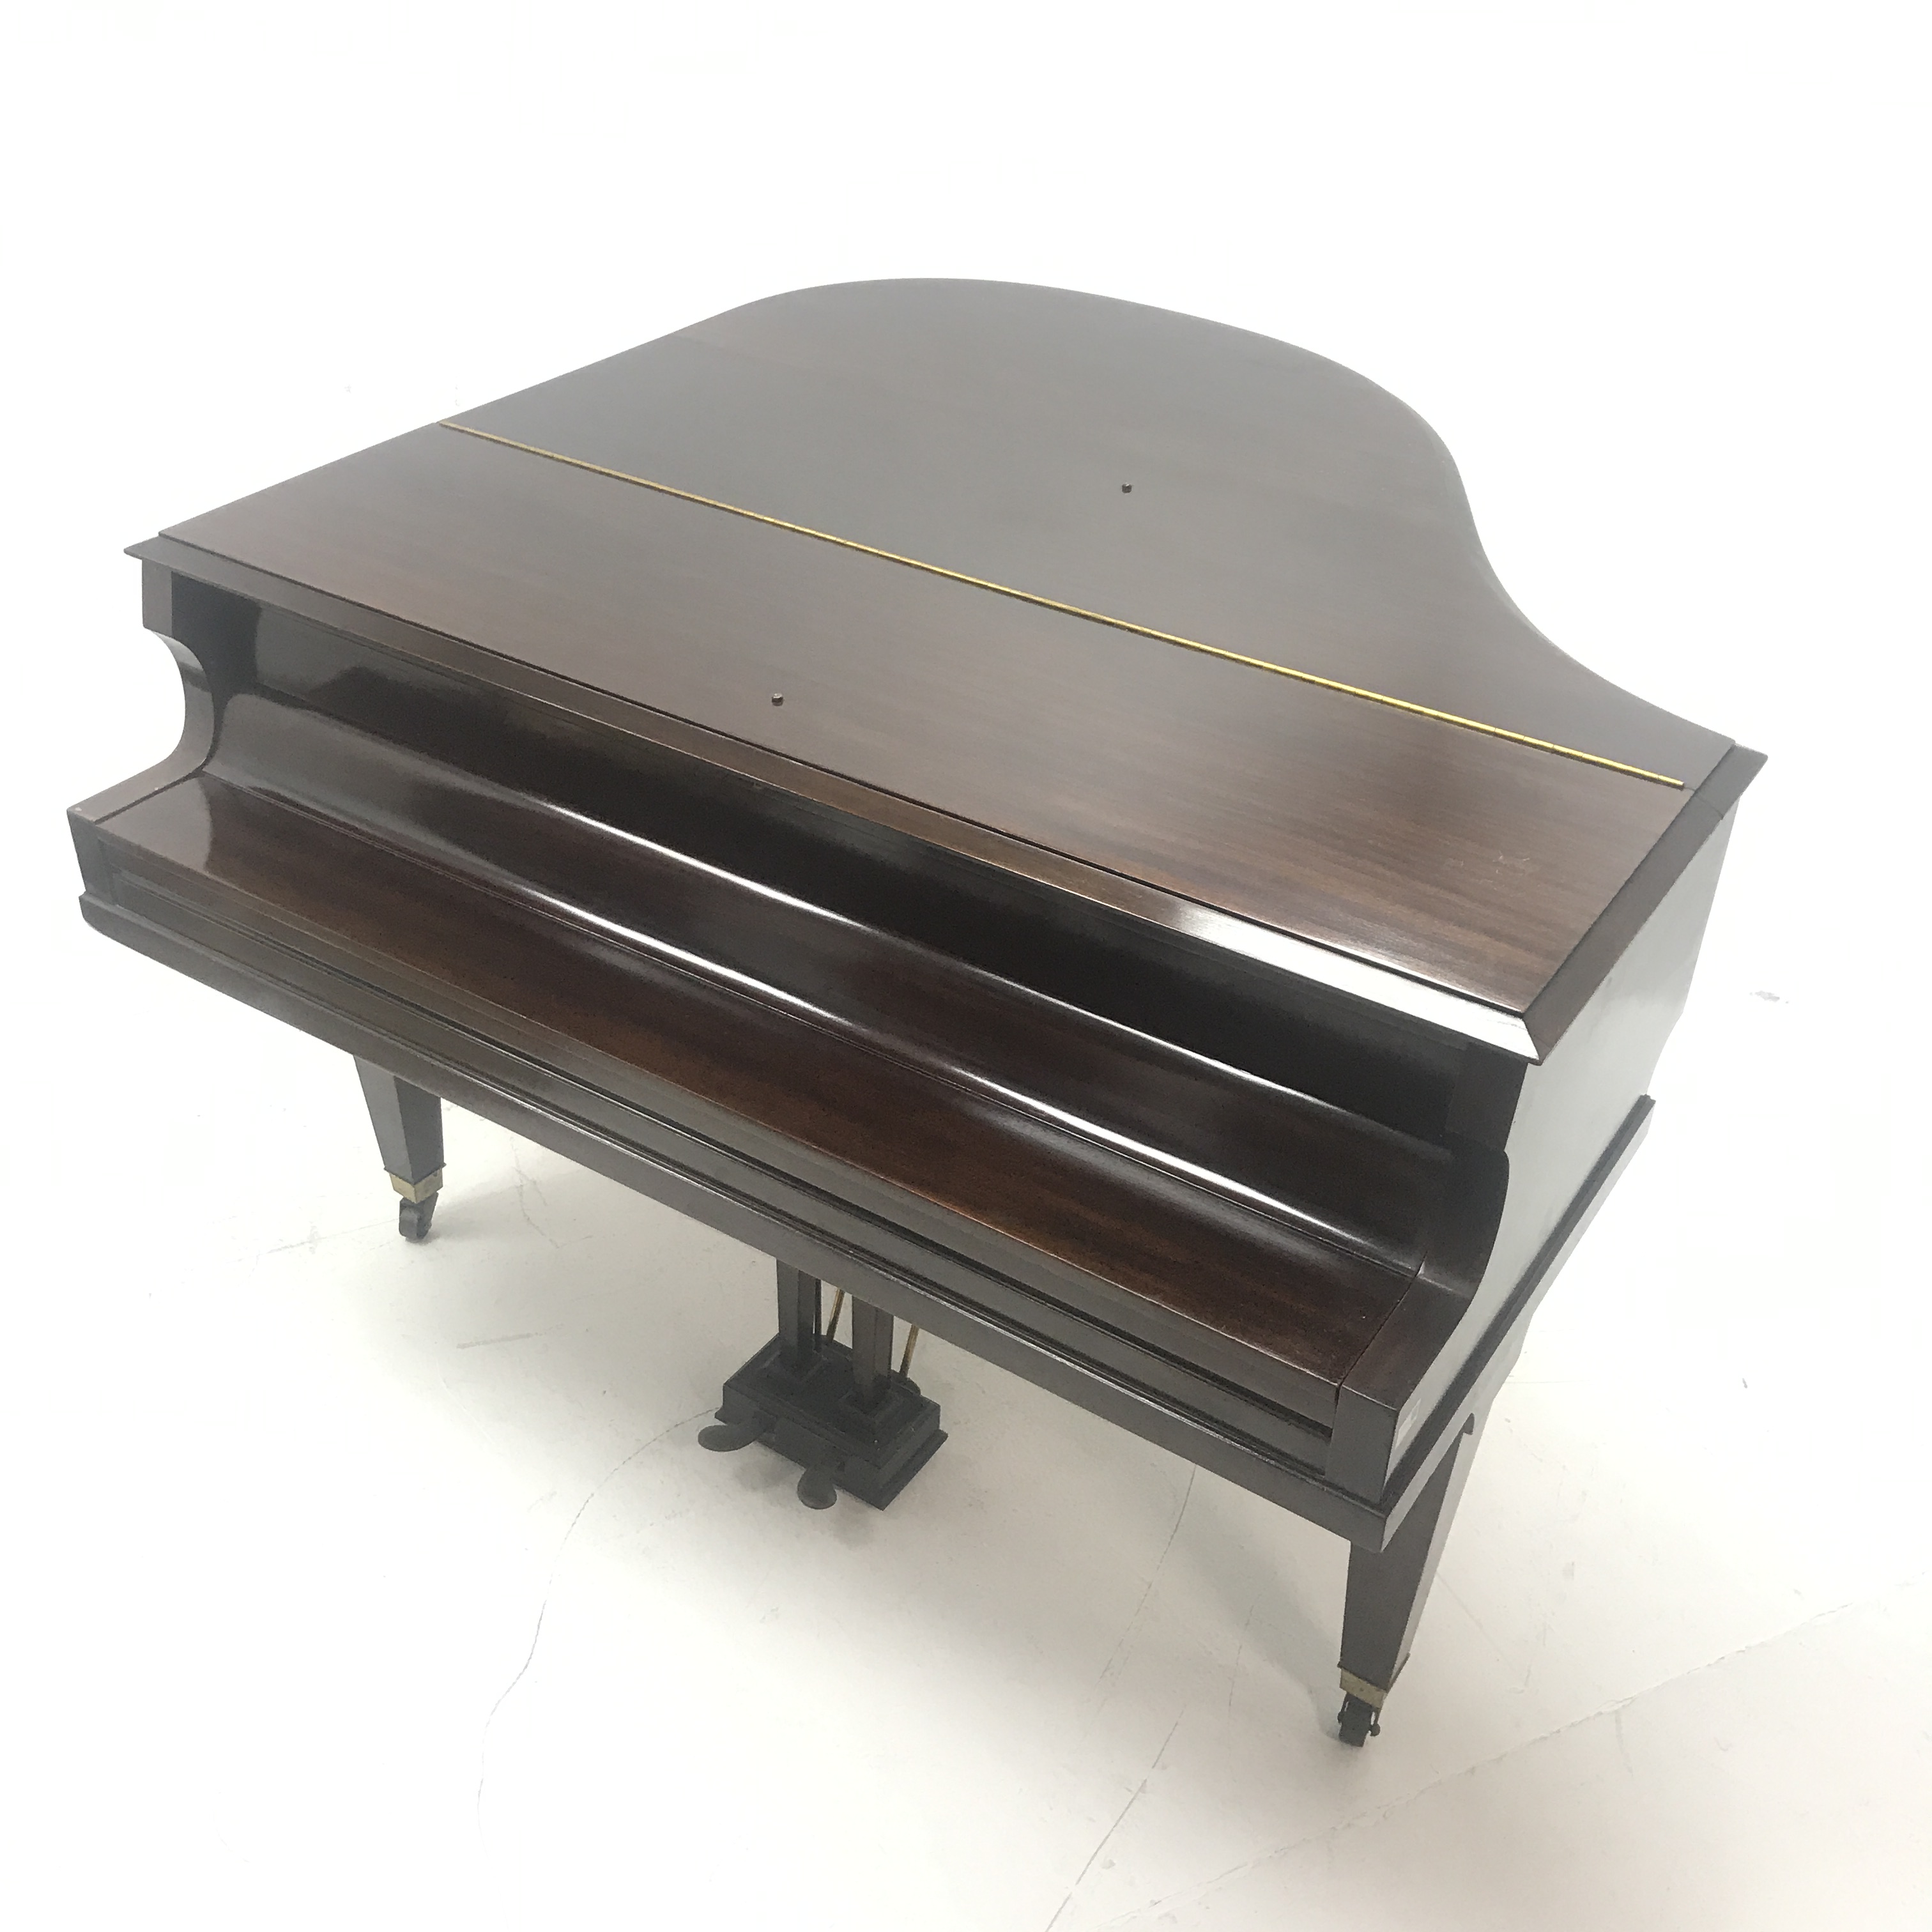 Evestaff London mahogany cased baby grand cast iron overstrung piano, W145cm, H147cm - Image 14 of 14